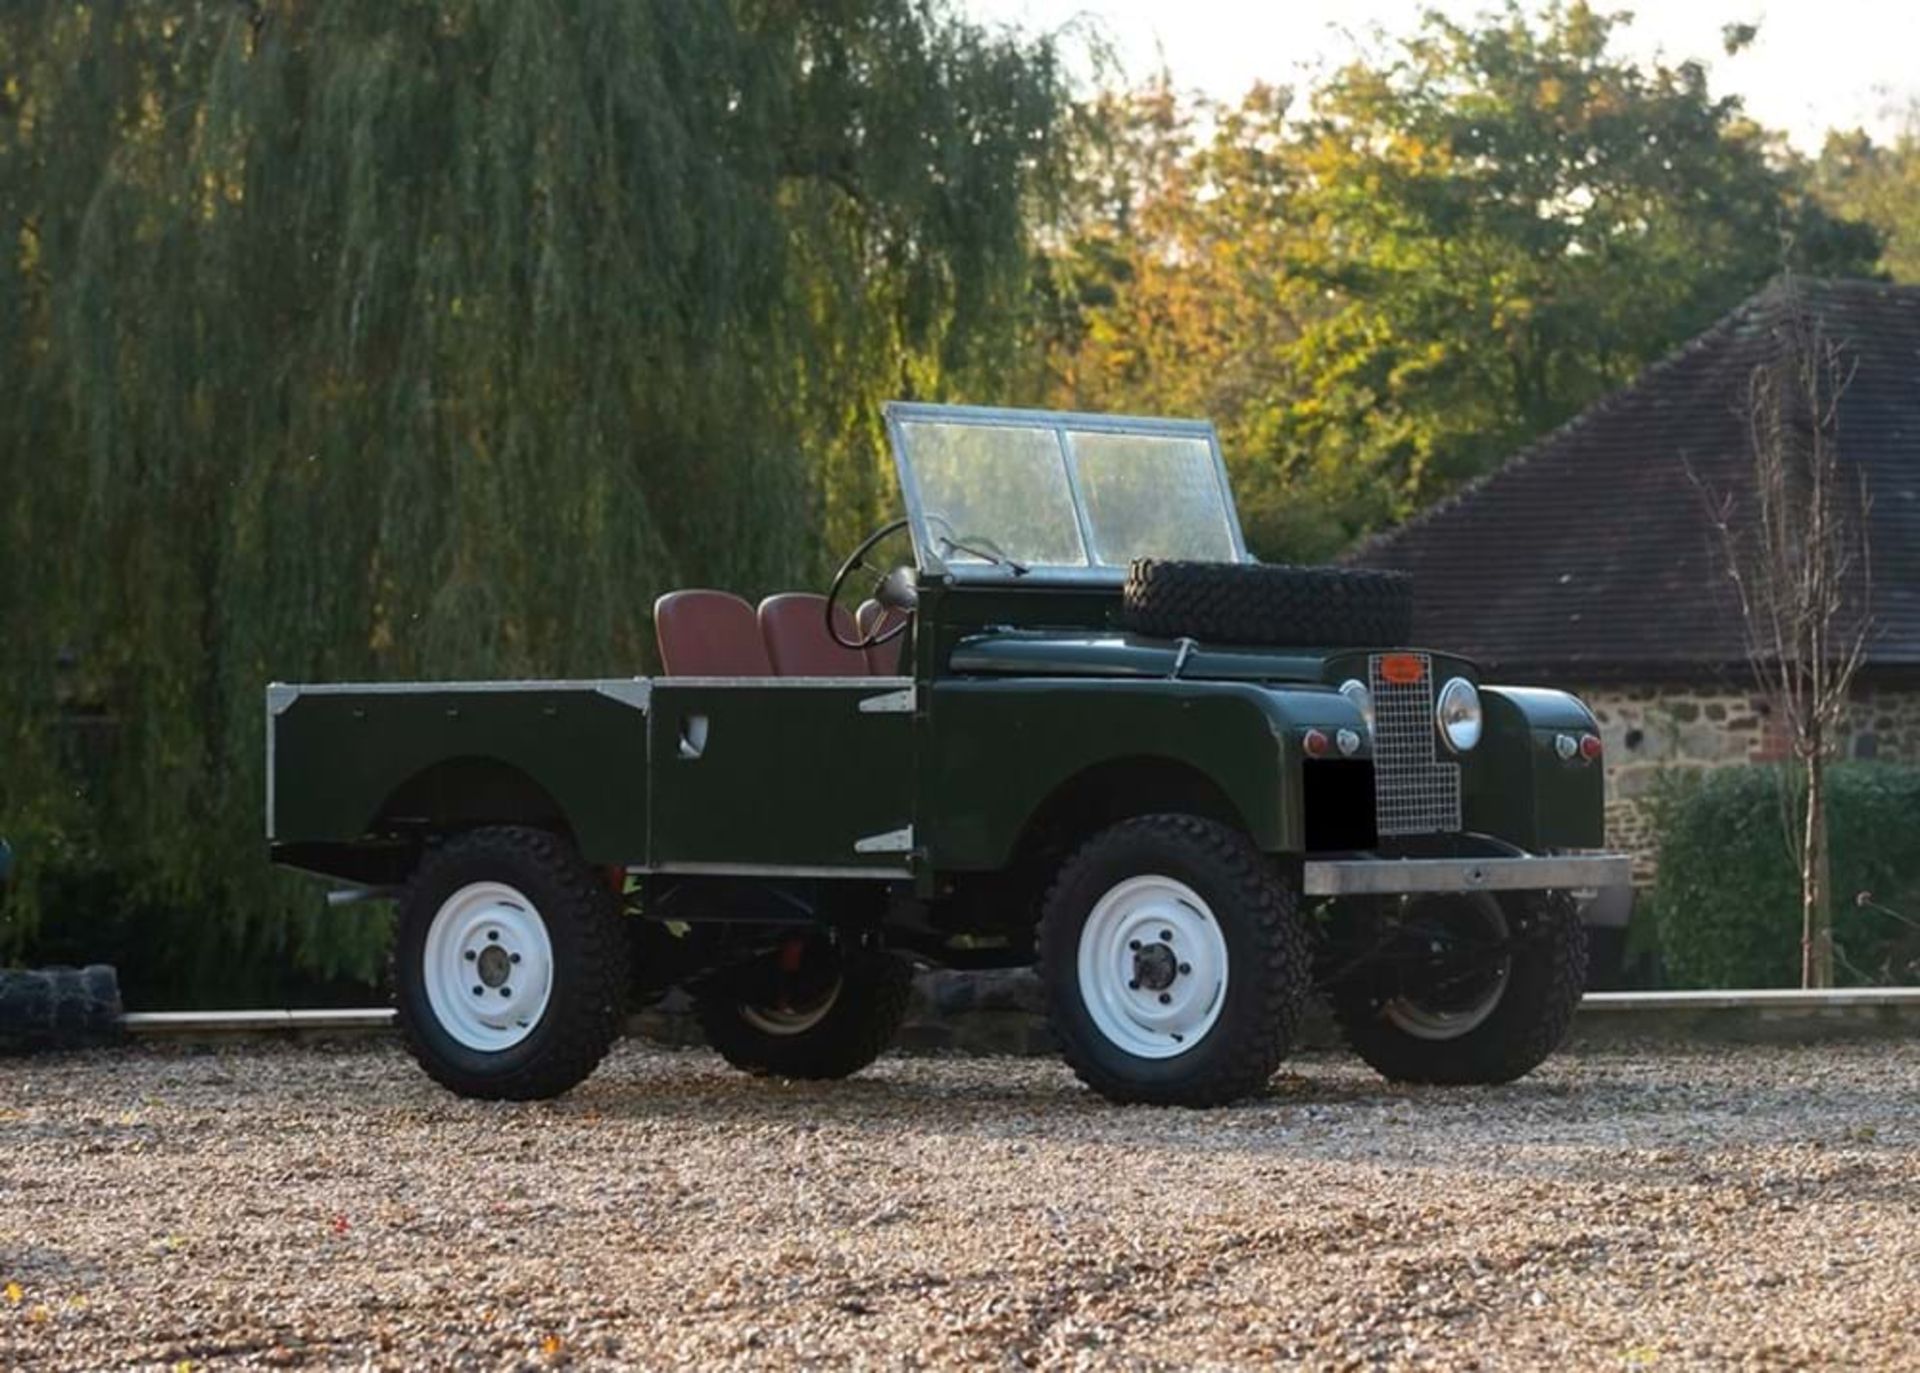 1955 Land Rover Series I (86") - Image 3 of 10